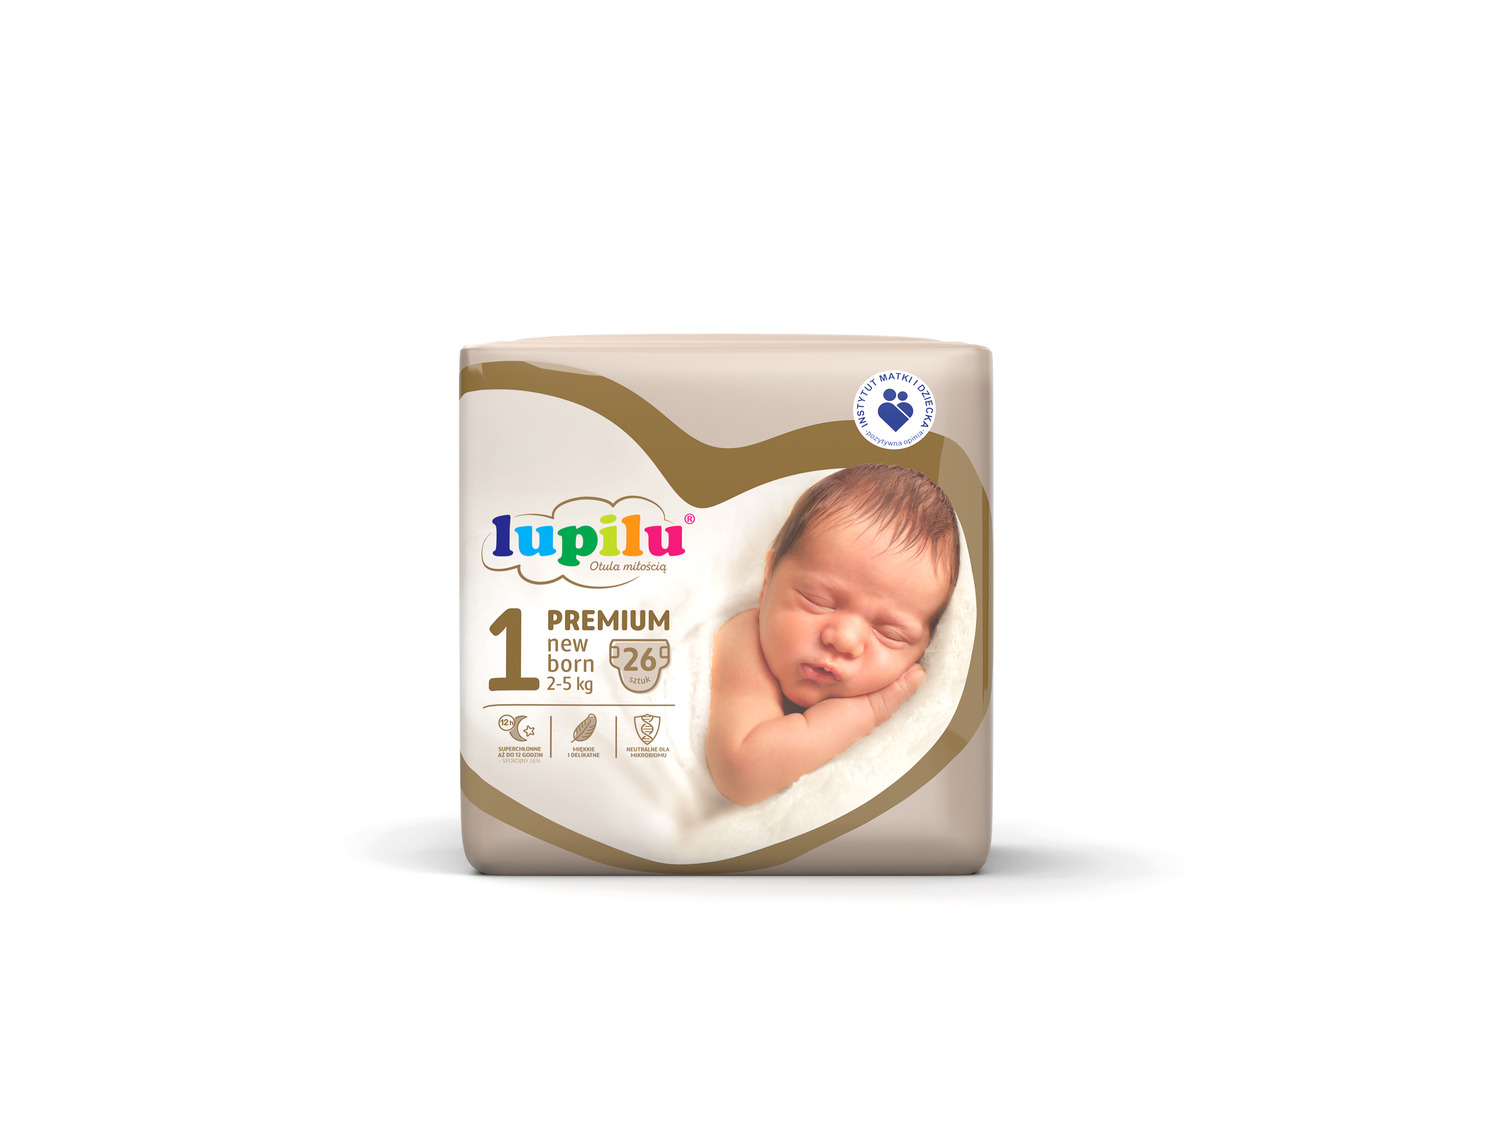 pieluchy pampers od producenta